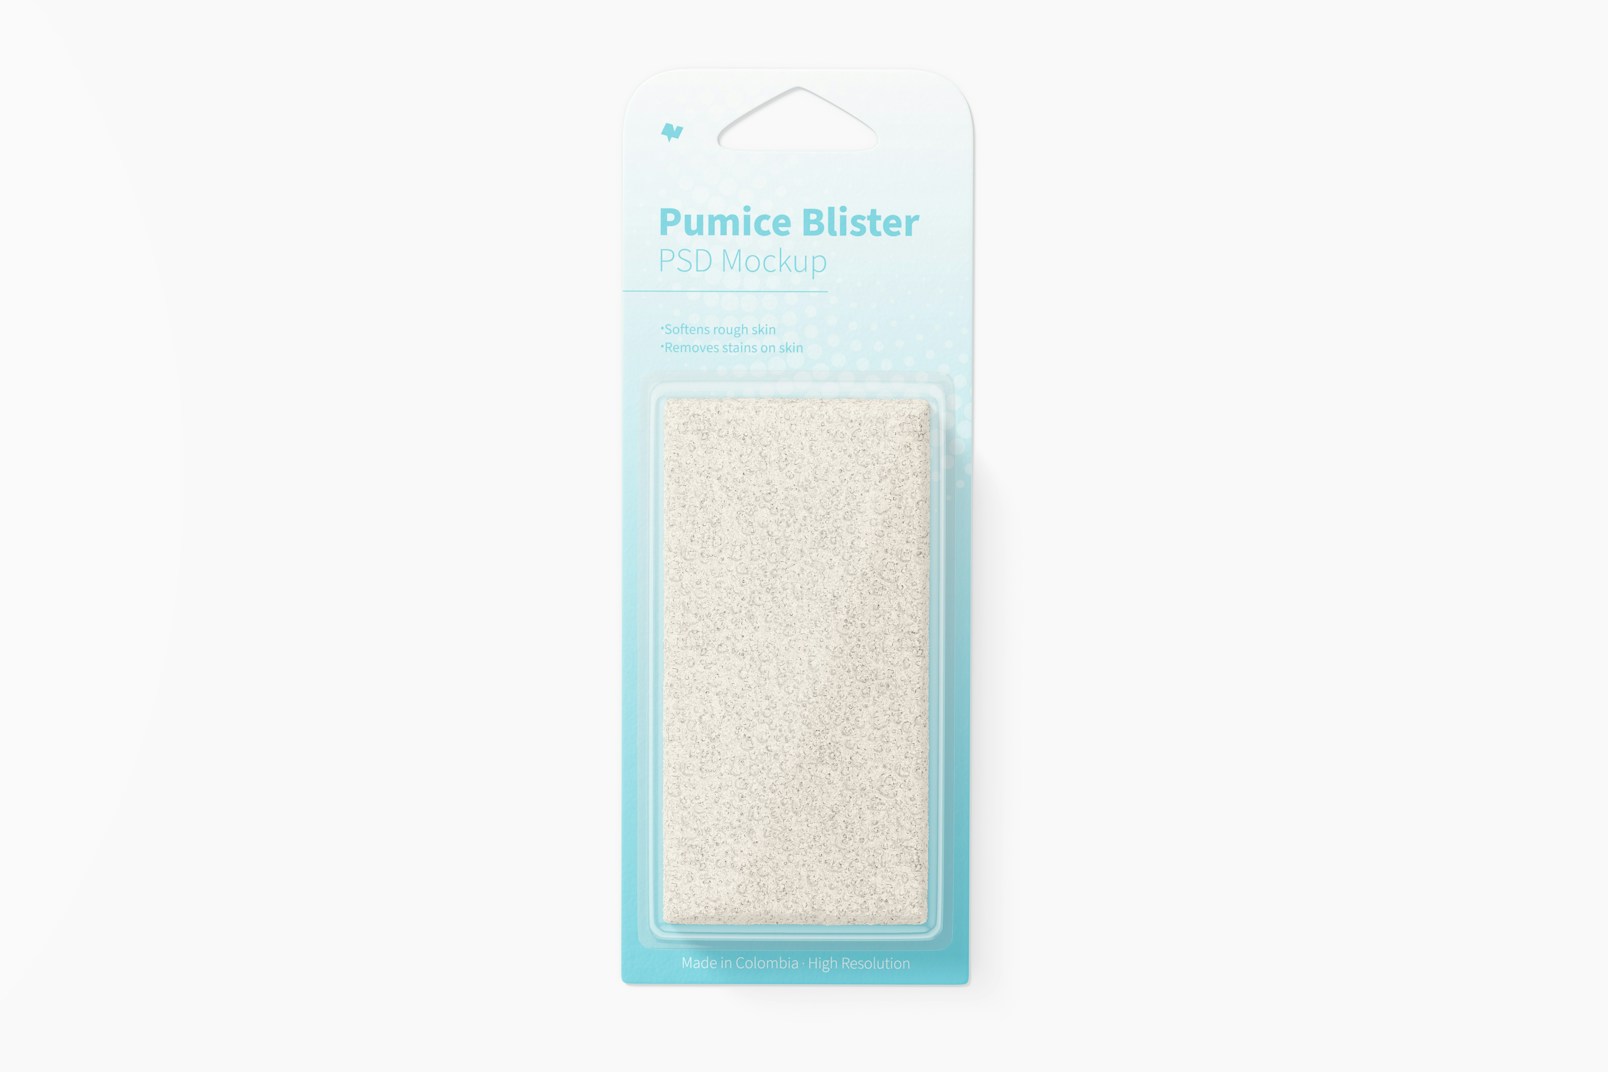 Pumice Blister Mockup, Front View